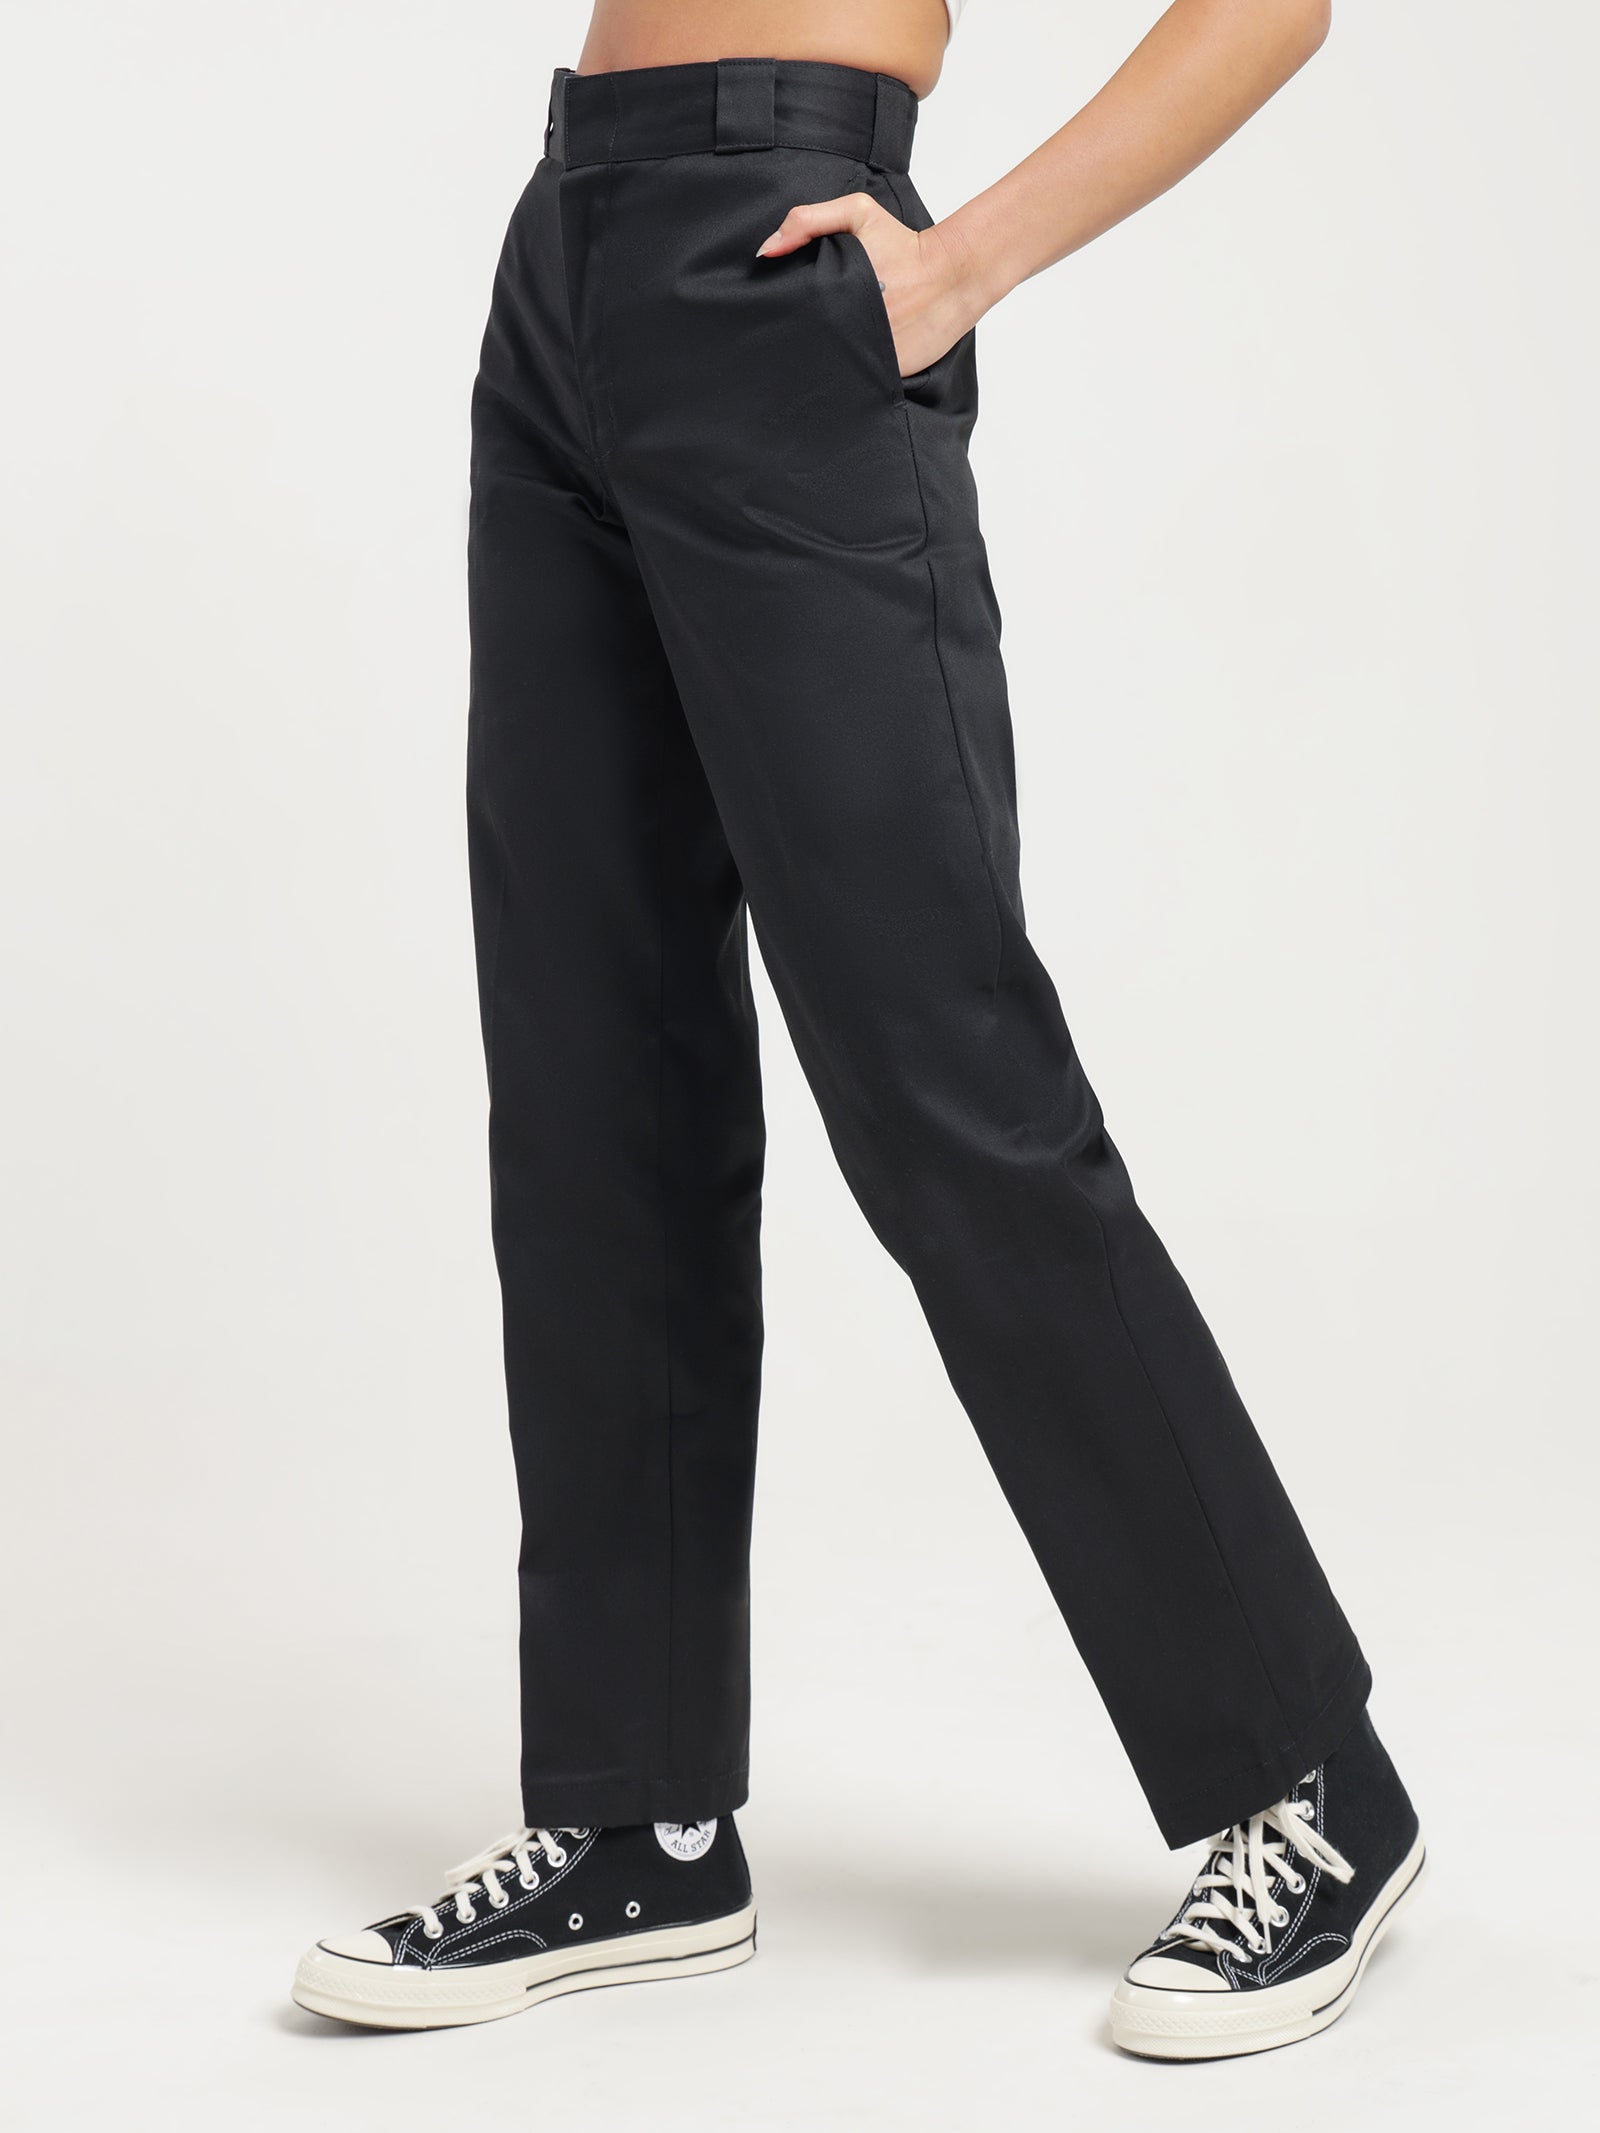 875 Tapered Fit Pants in Black - Glue Store